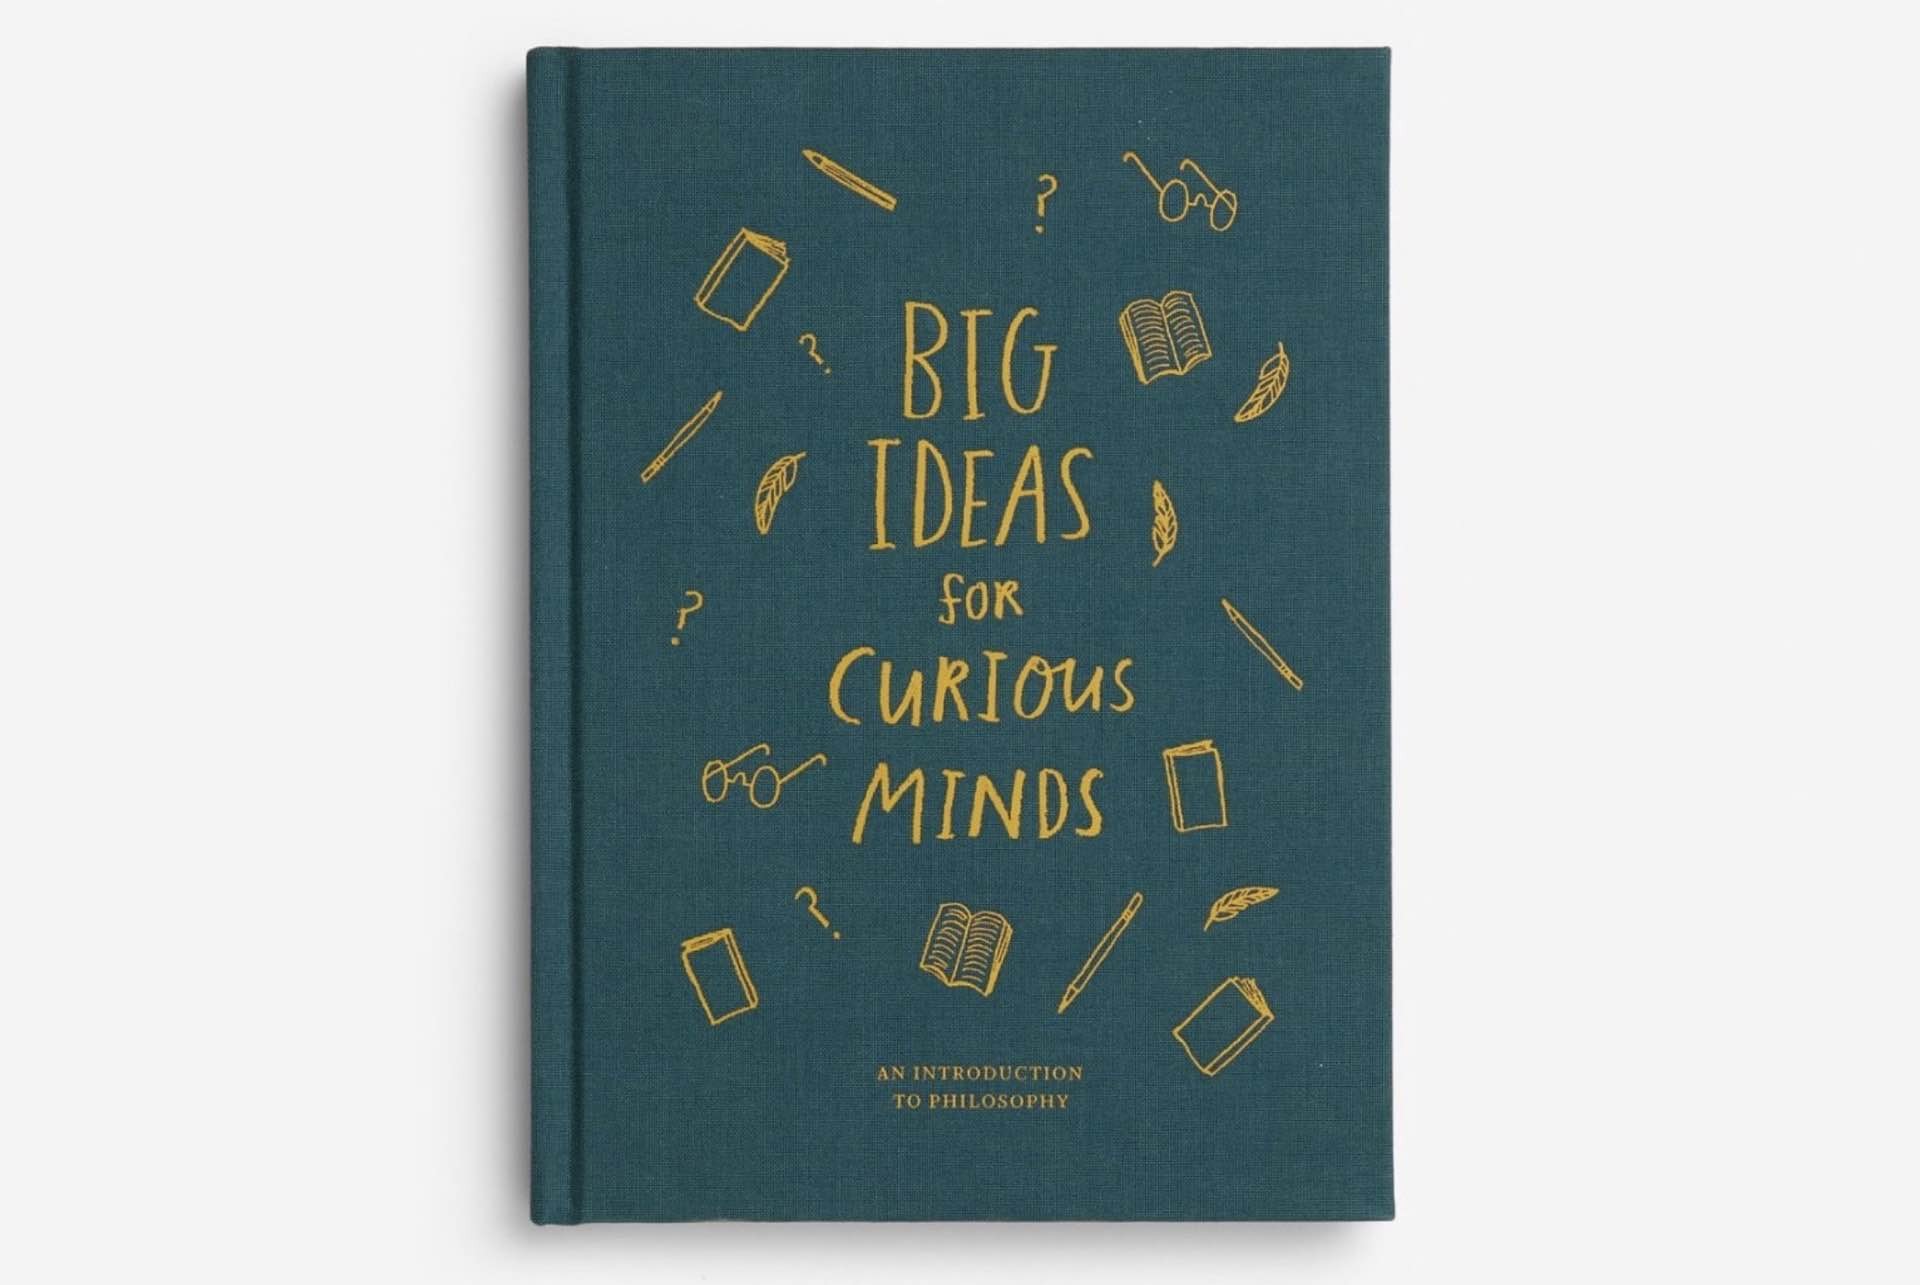 Big Ideas for Curious Minds by The School of Life. ($19 hardcover)